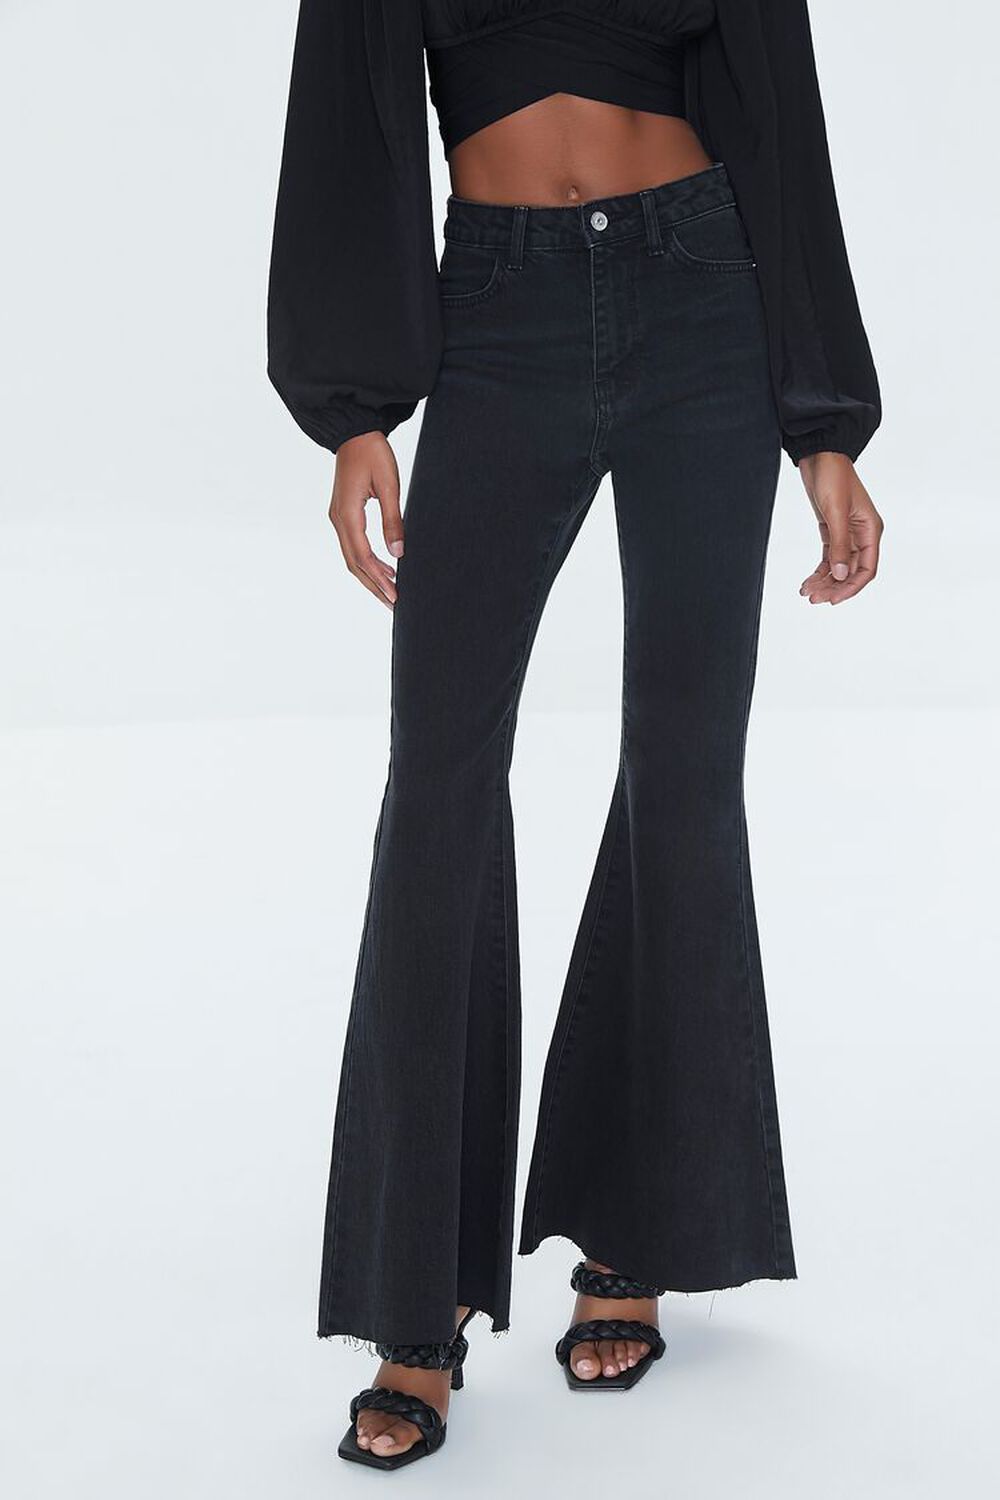 BLACK Recycled Cotton Raw-Cut Flare Jeans, image 2